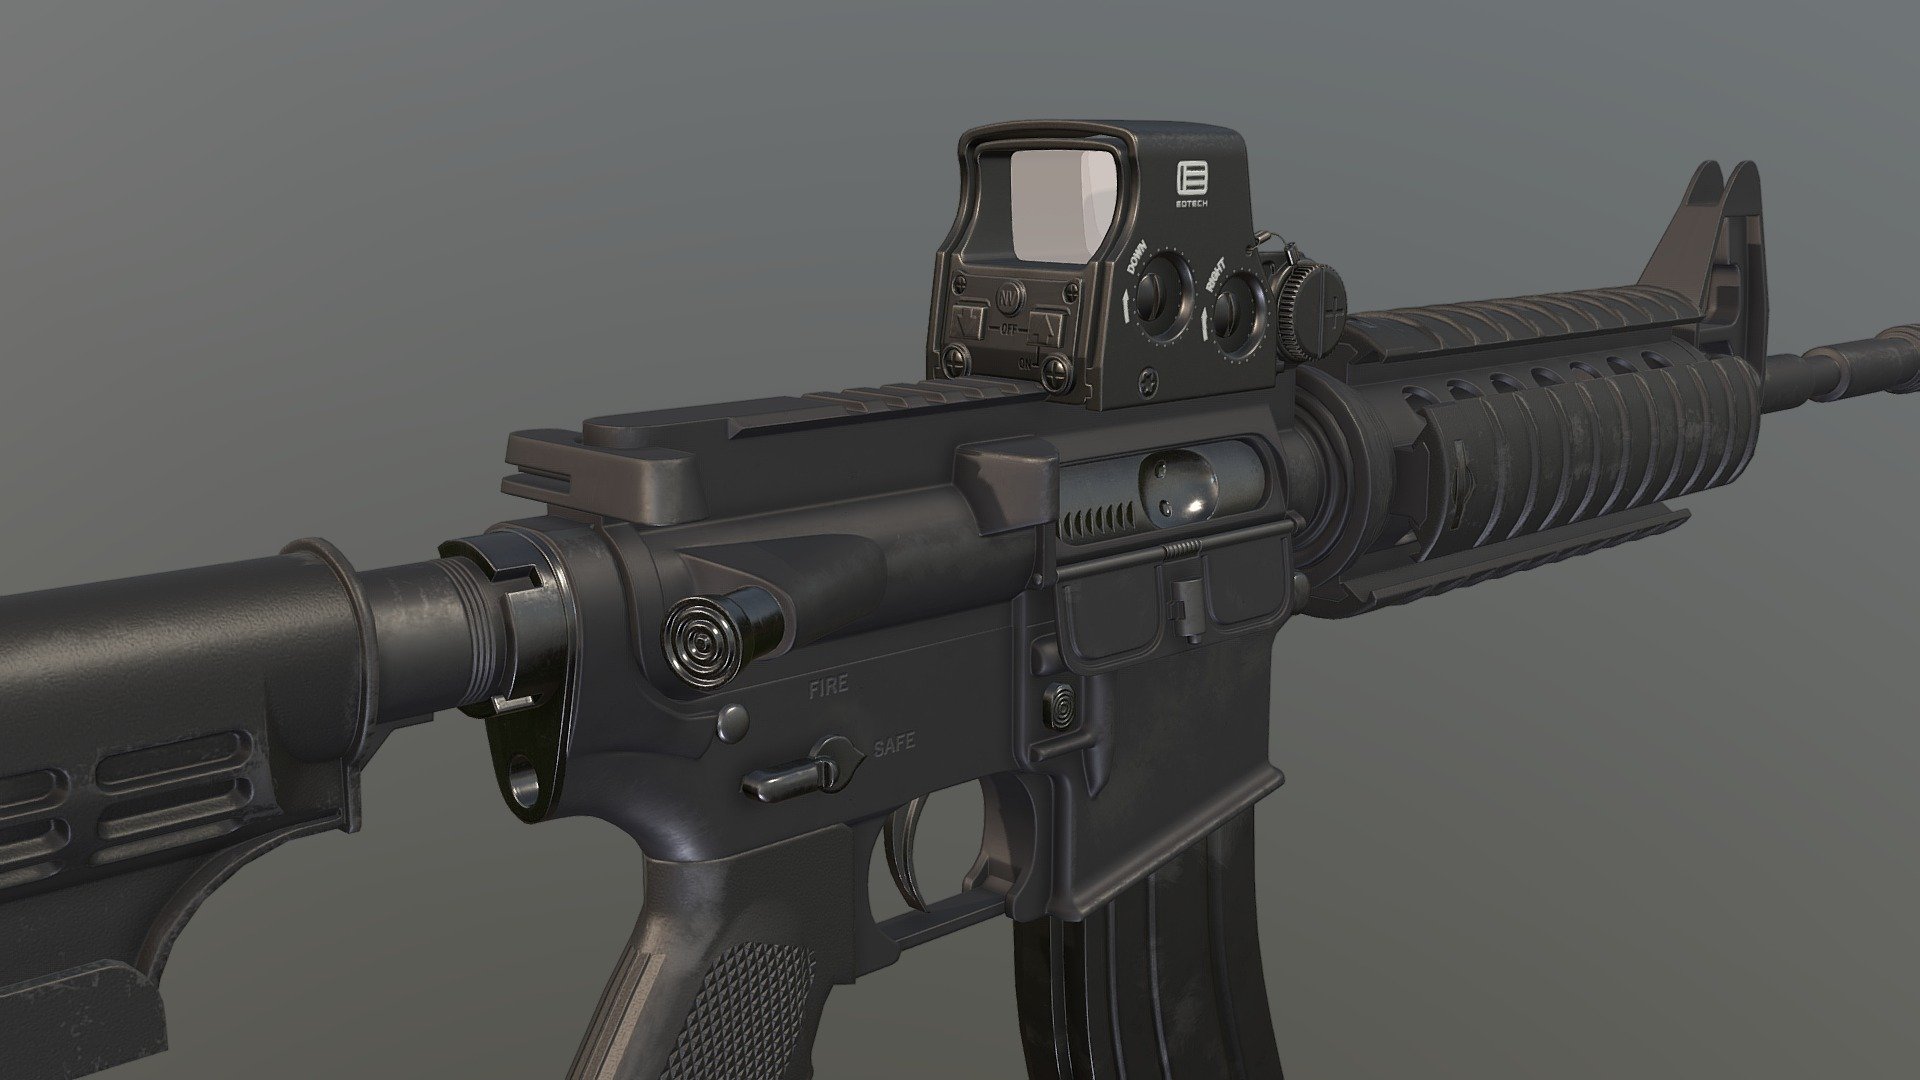 M4a1 Rifle game ready with Eotech Scope XPS 2-0 - M4a1 with Eotech Scope - 3D model by Esen Bonmart (@bonmart) 3d model